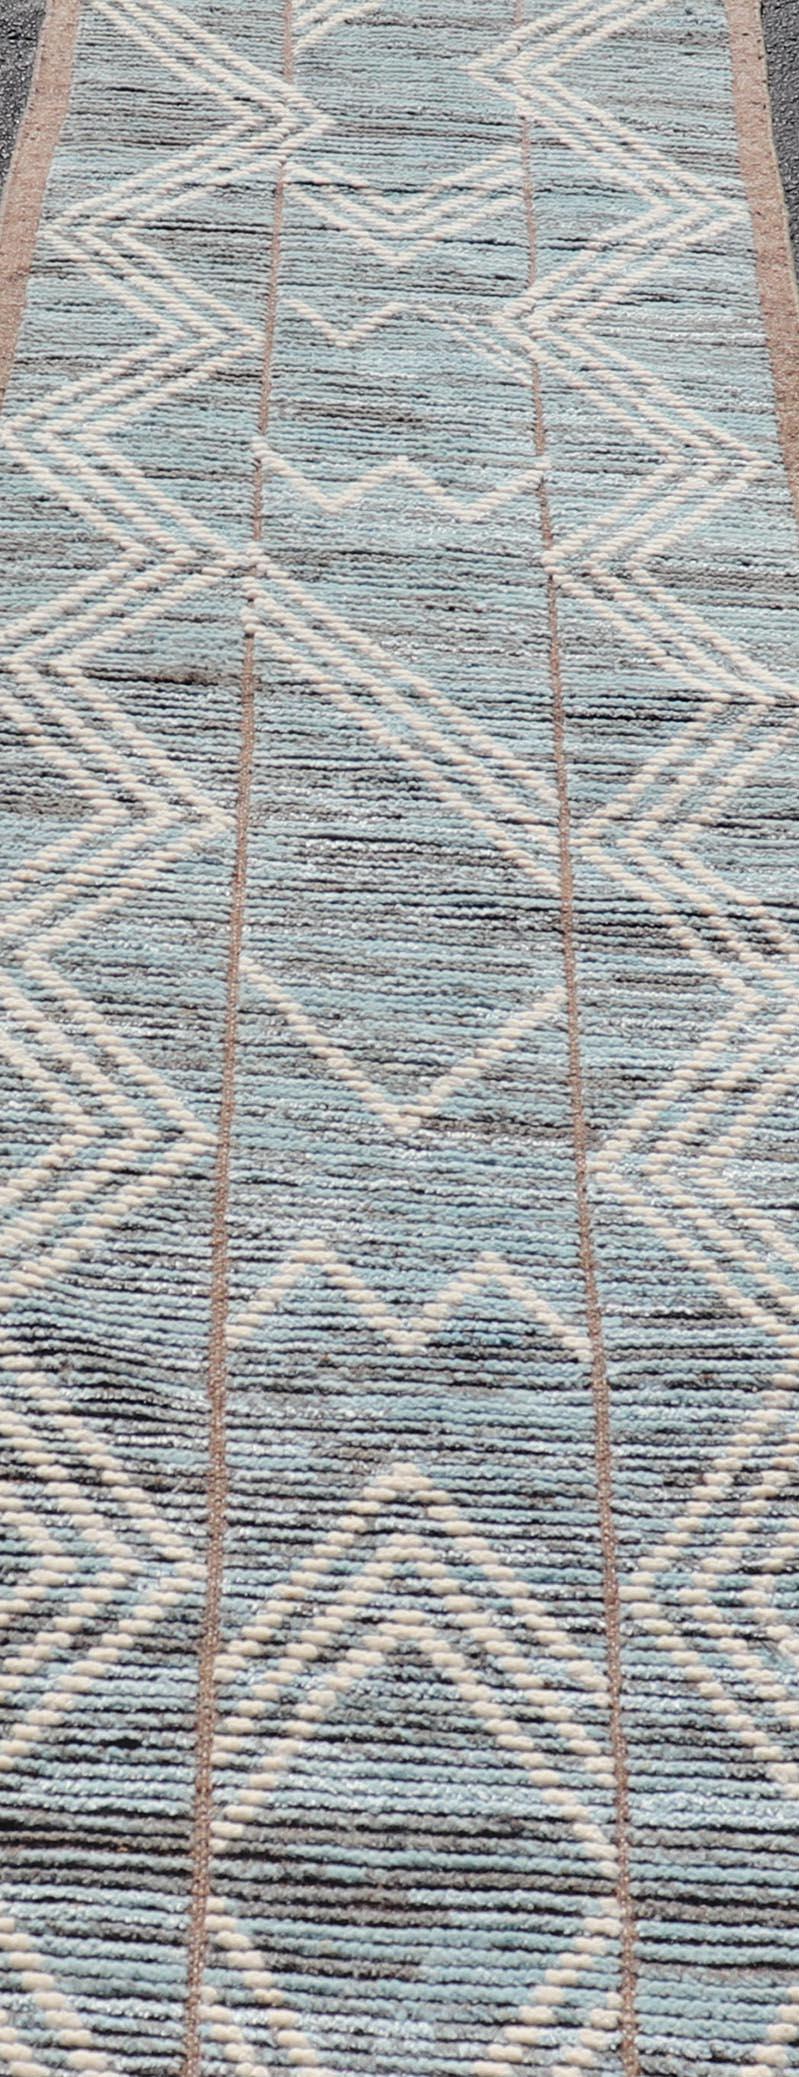 Modern Hand-Knotted Runner in Wool with Diamond Design With Teal, Ivory Tones. Keivan Woven Arts; rug MSE-12769, country of origin / type: Afghanistan / Modern Casual, circa Early-21th Century.
Measures: 2'6 x 10'9 
This modern casual tribal runner